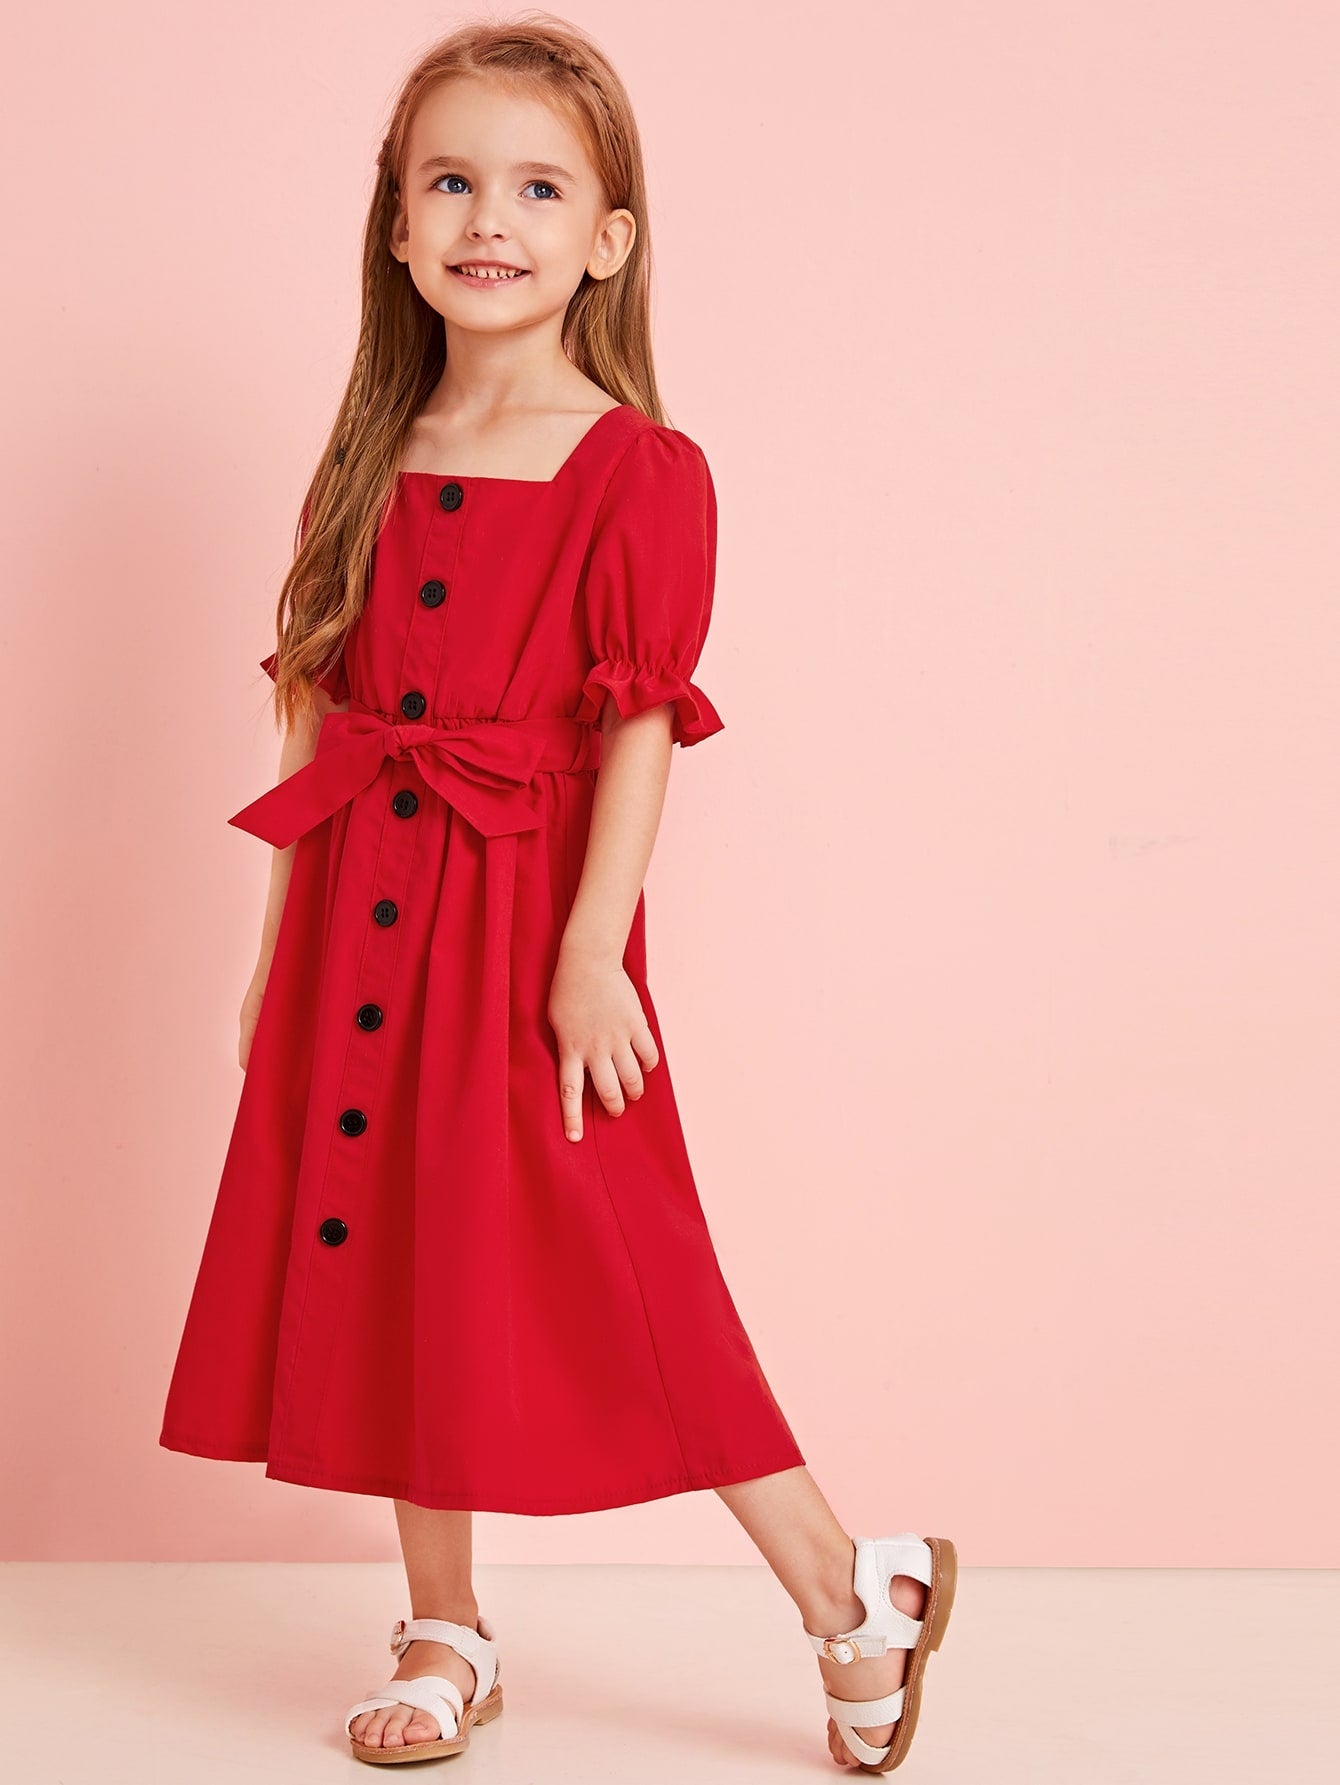 Toddler Girls Square Neck Button Front Belted A-line Dress